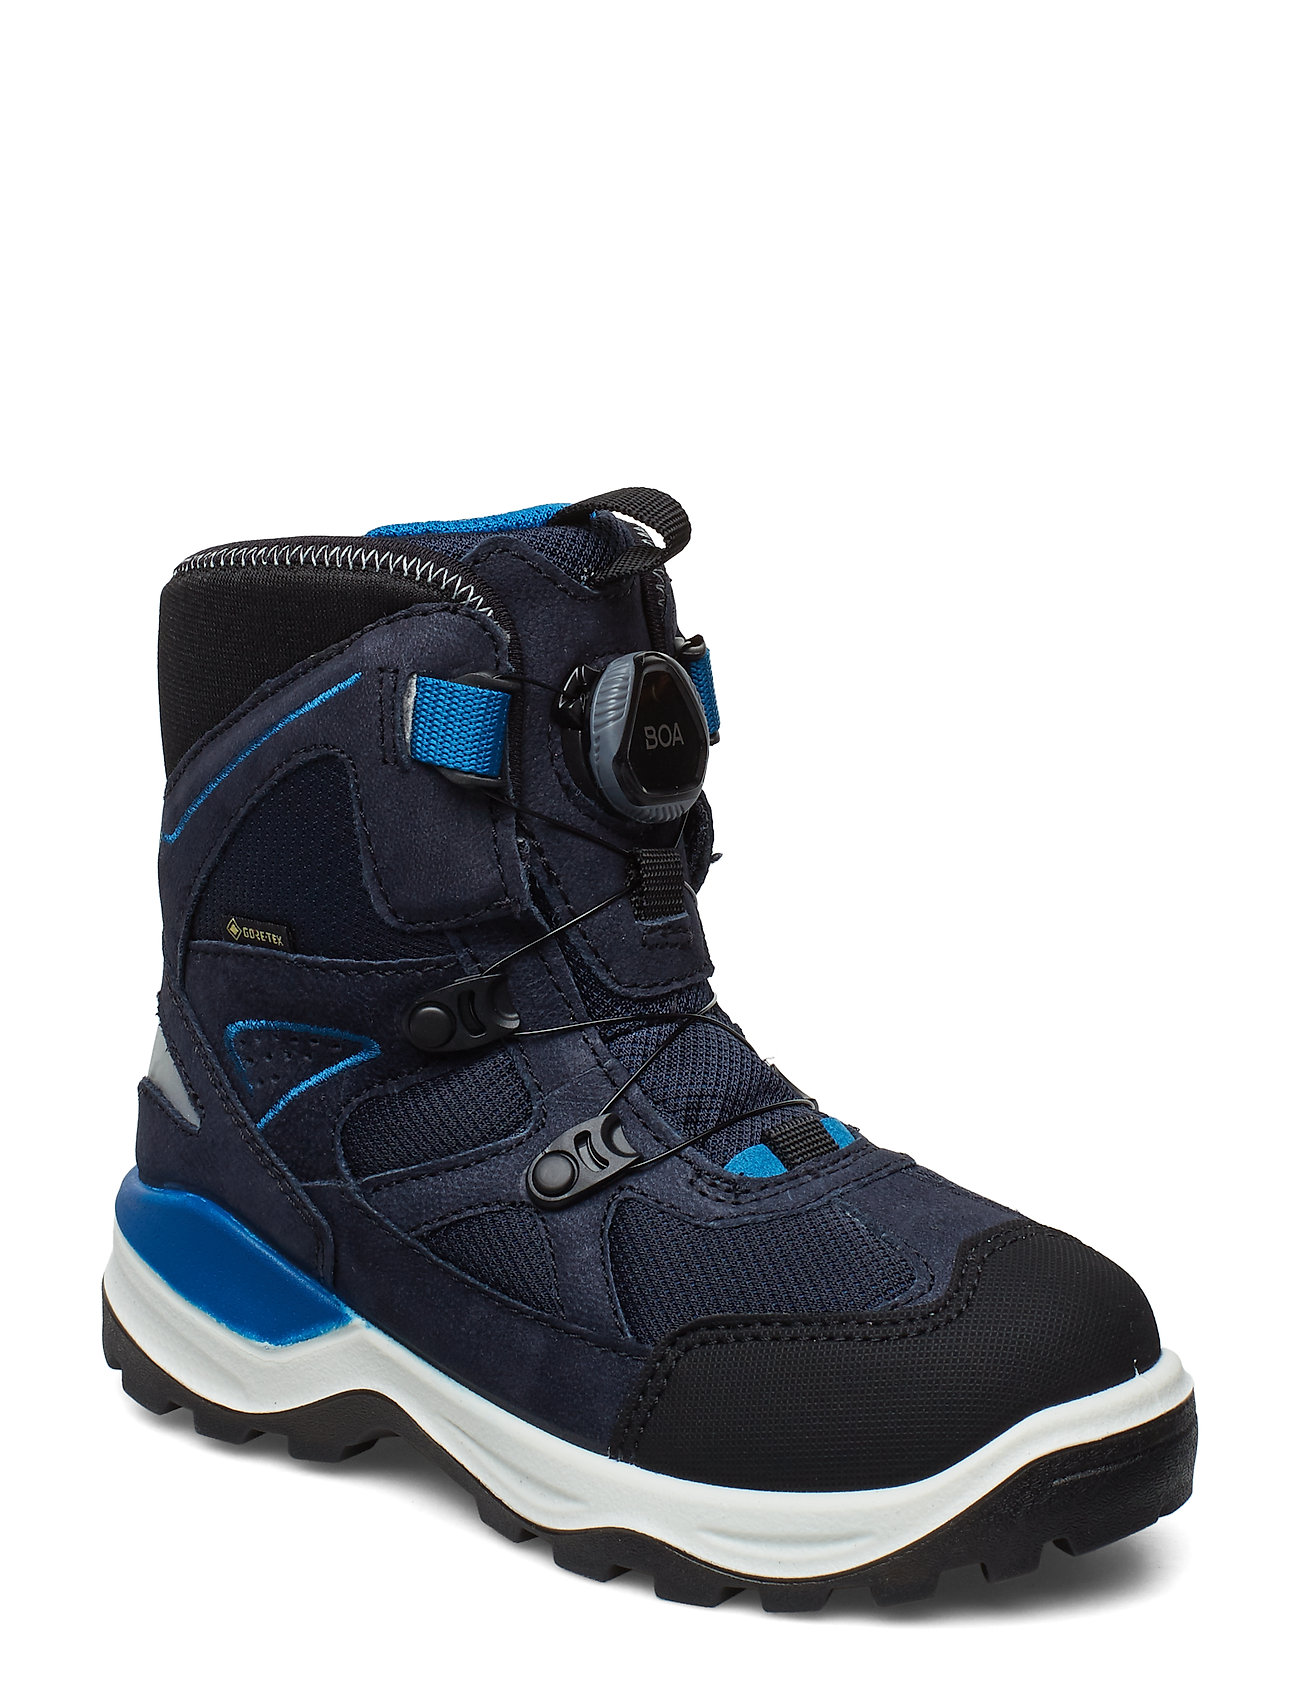 Nat sted mangel Krigsfanger ECCO Snow Mountain - Boots - Boozt.com